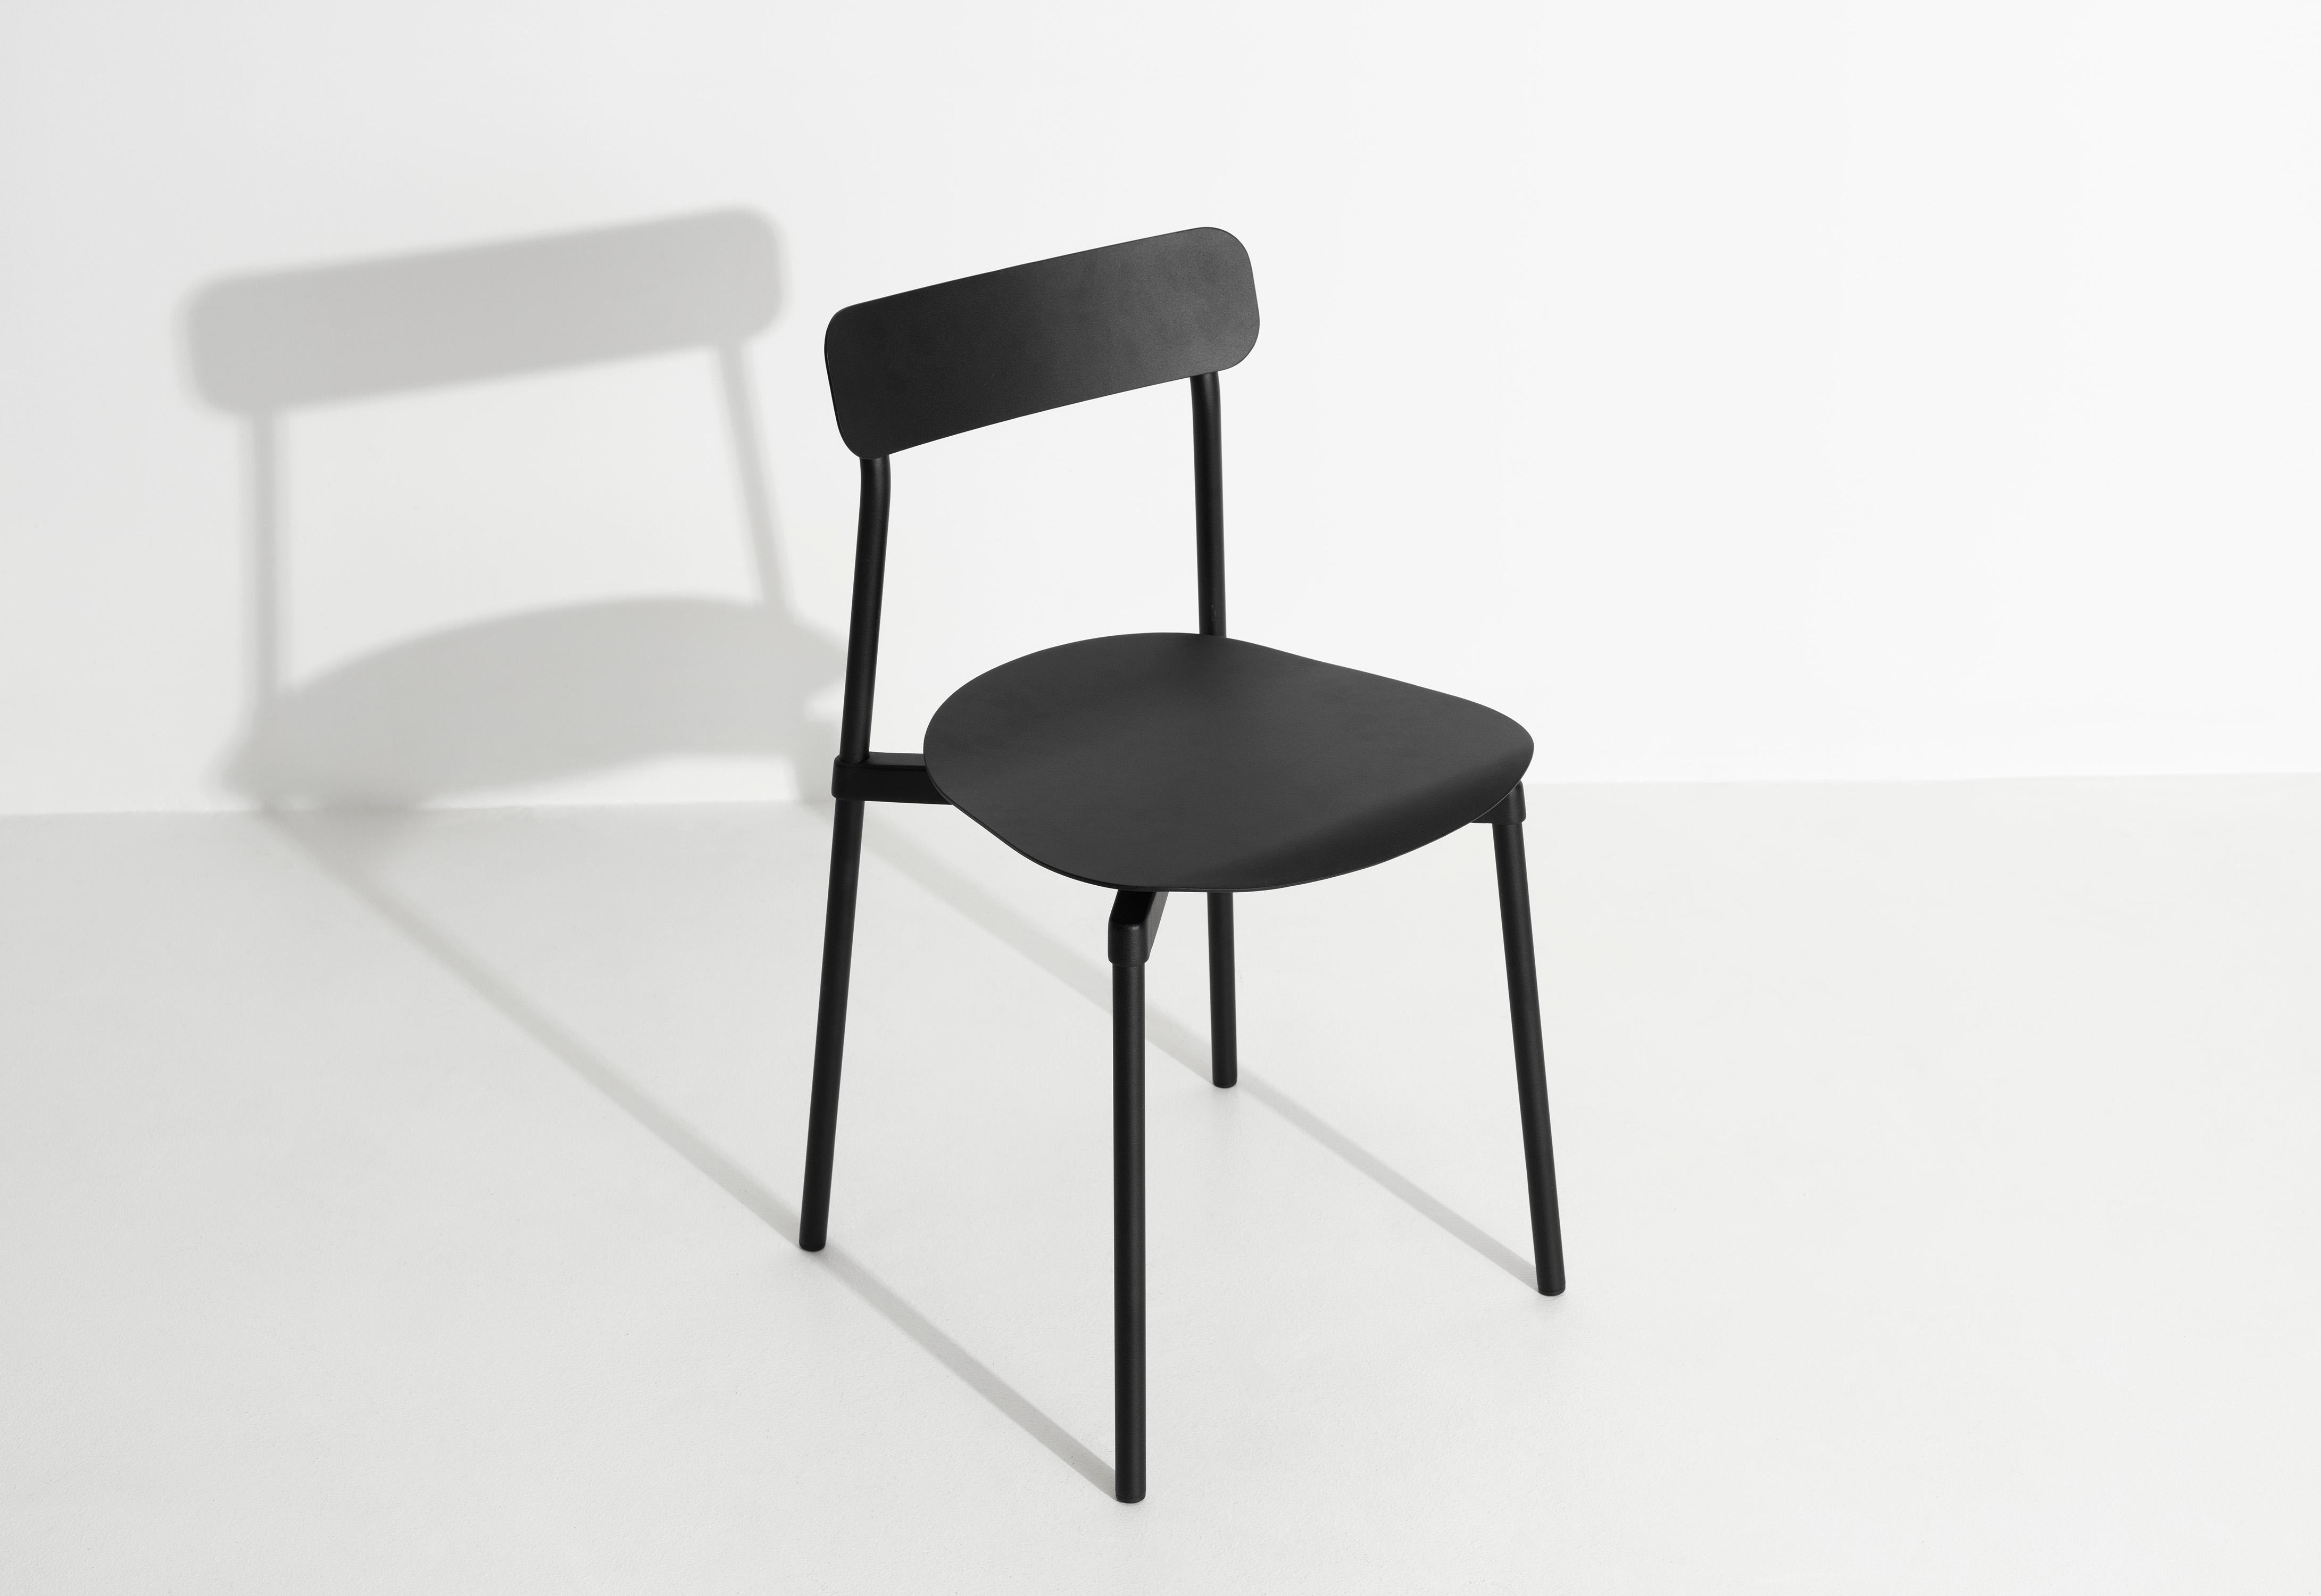 Petite Friture Fromme Chair in Black Aluminium by Tom Chung, 2019 For Sale 3